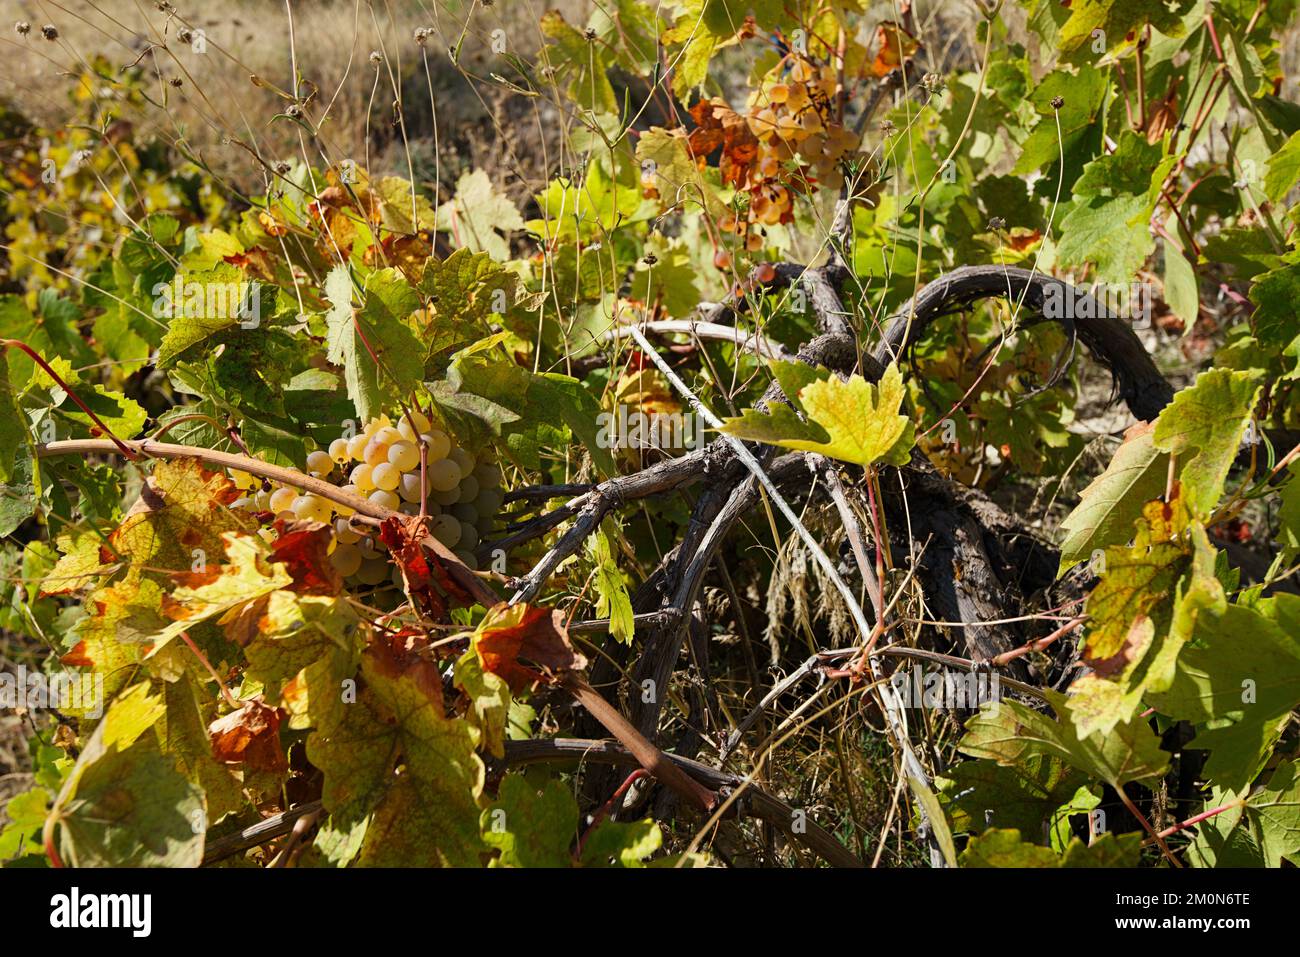 Sweet and tasty wild white grape bunch on the vine Stock Photo